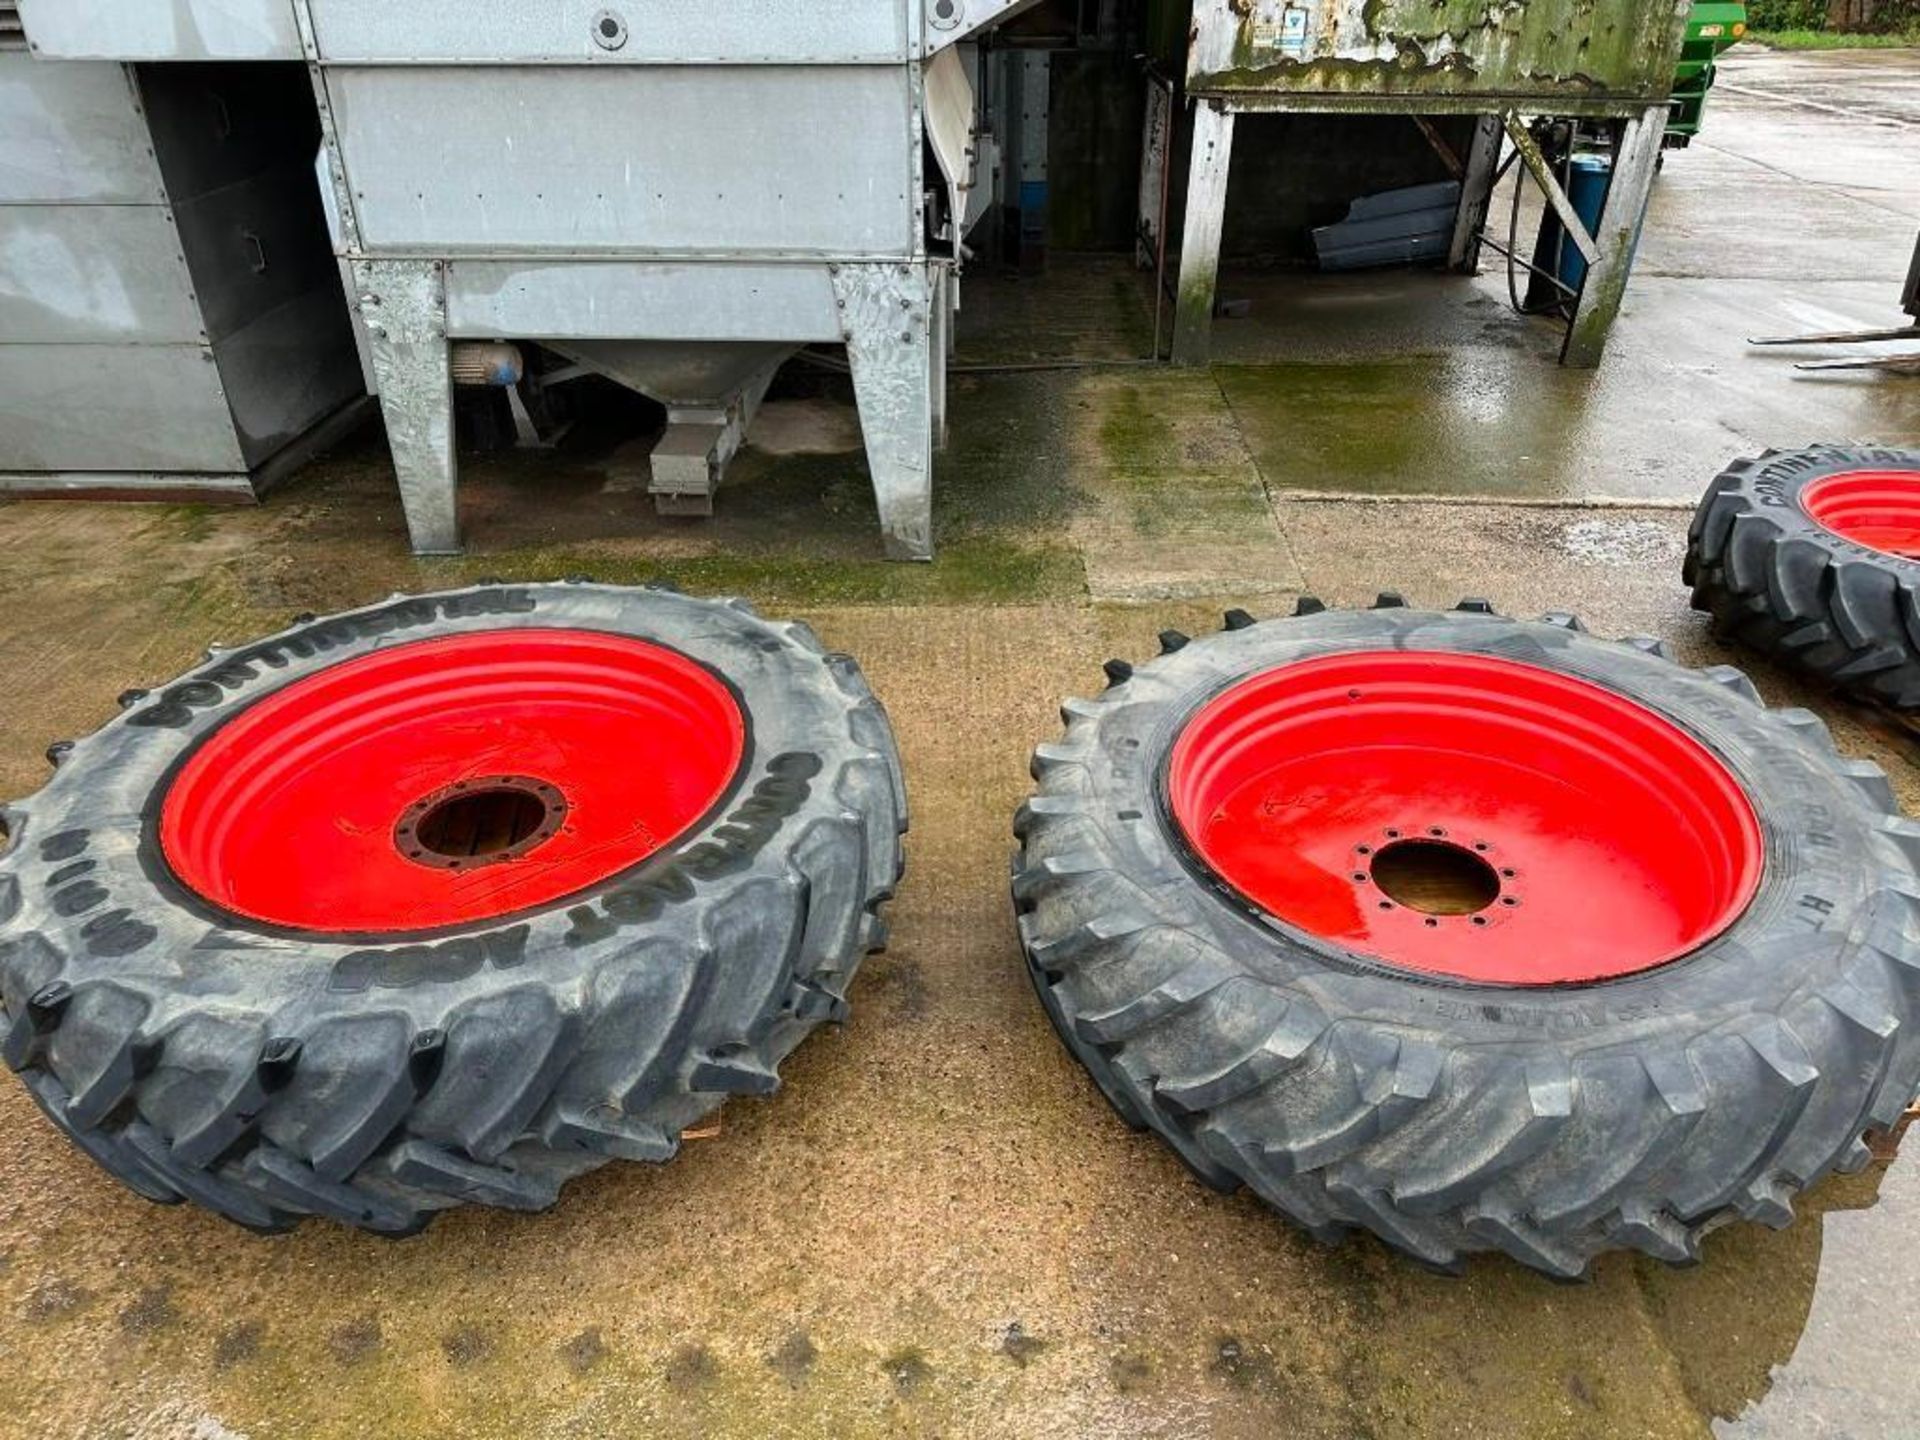 Set of 380/85R34 front and 18.4R46 rear wheels and tyres to fit Fendt 820 and 724. - Image 4 of 5